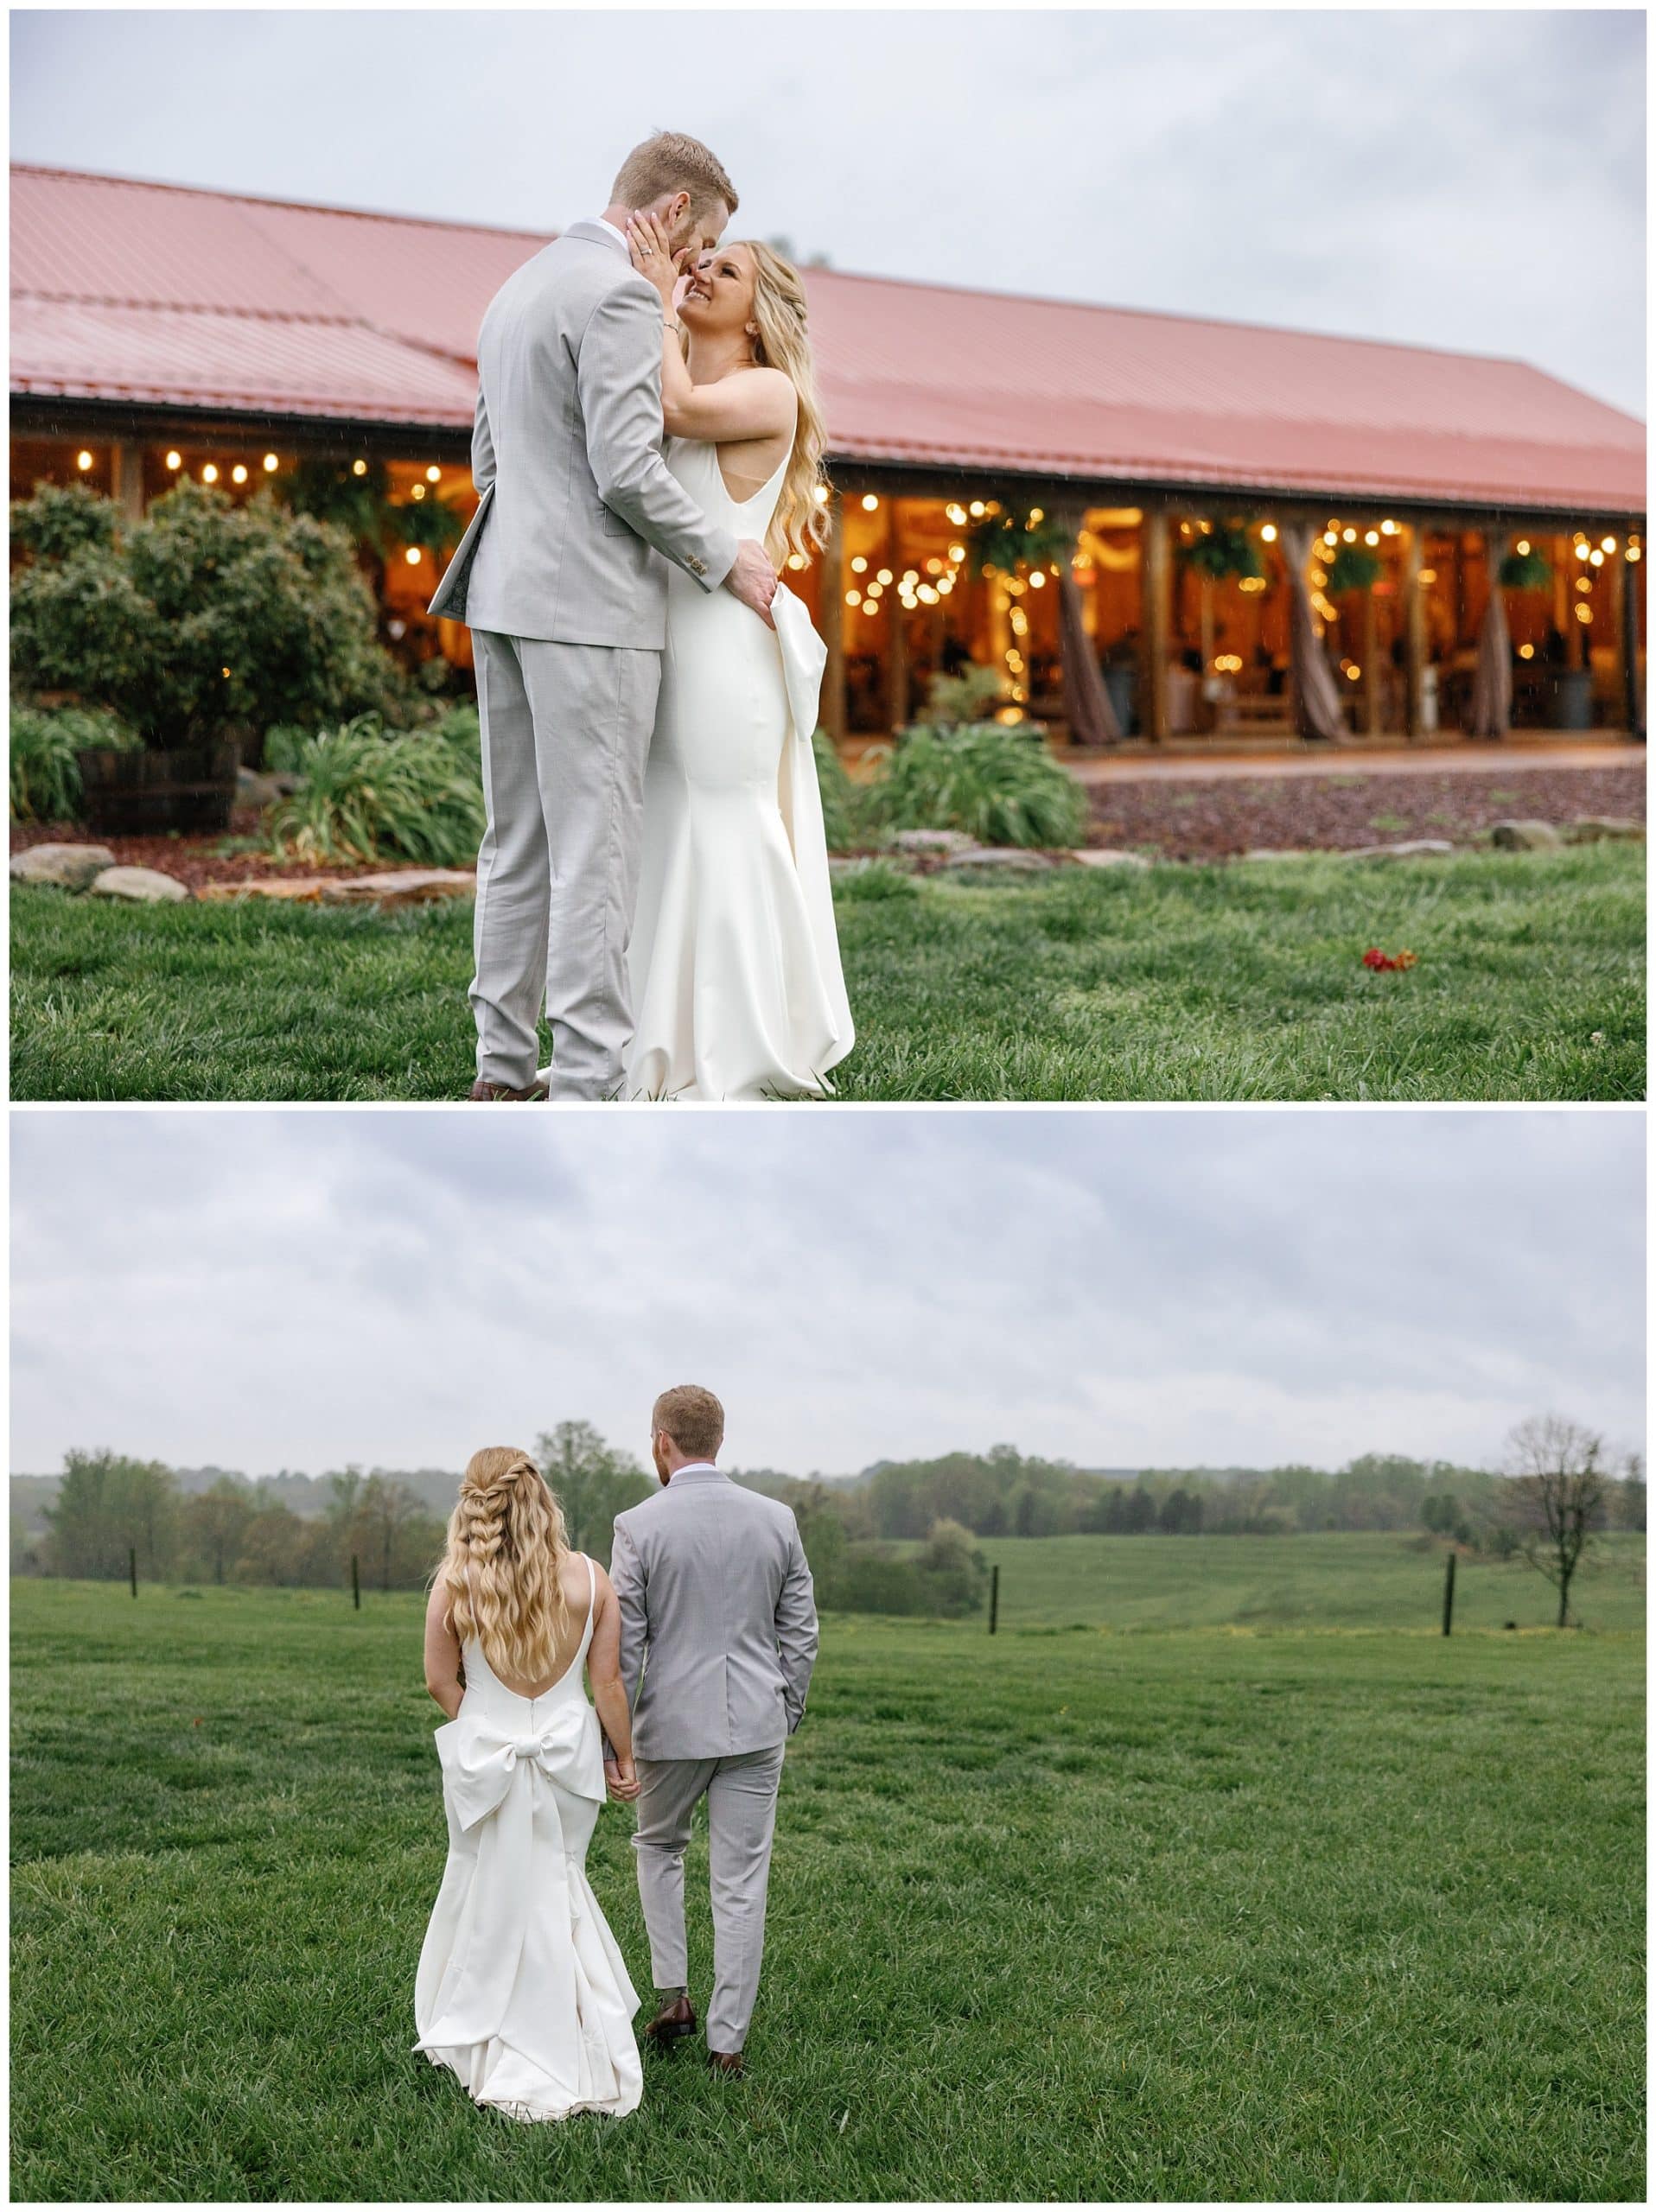 Bride and groom photos at farm haven and in a field 